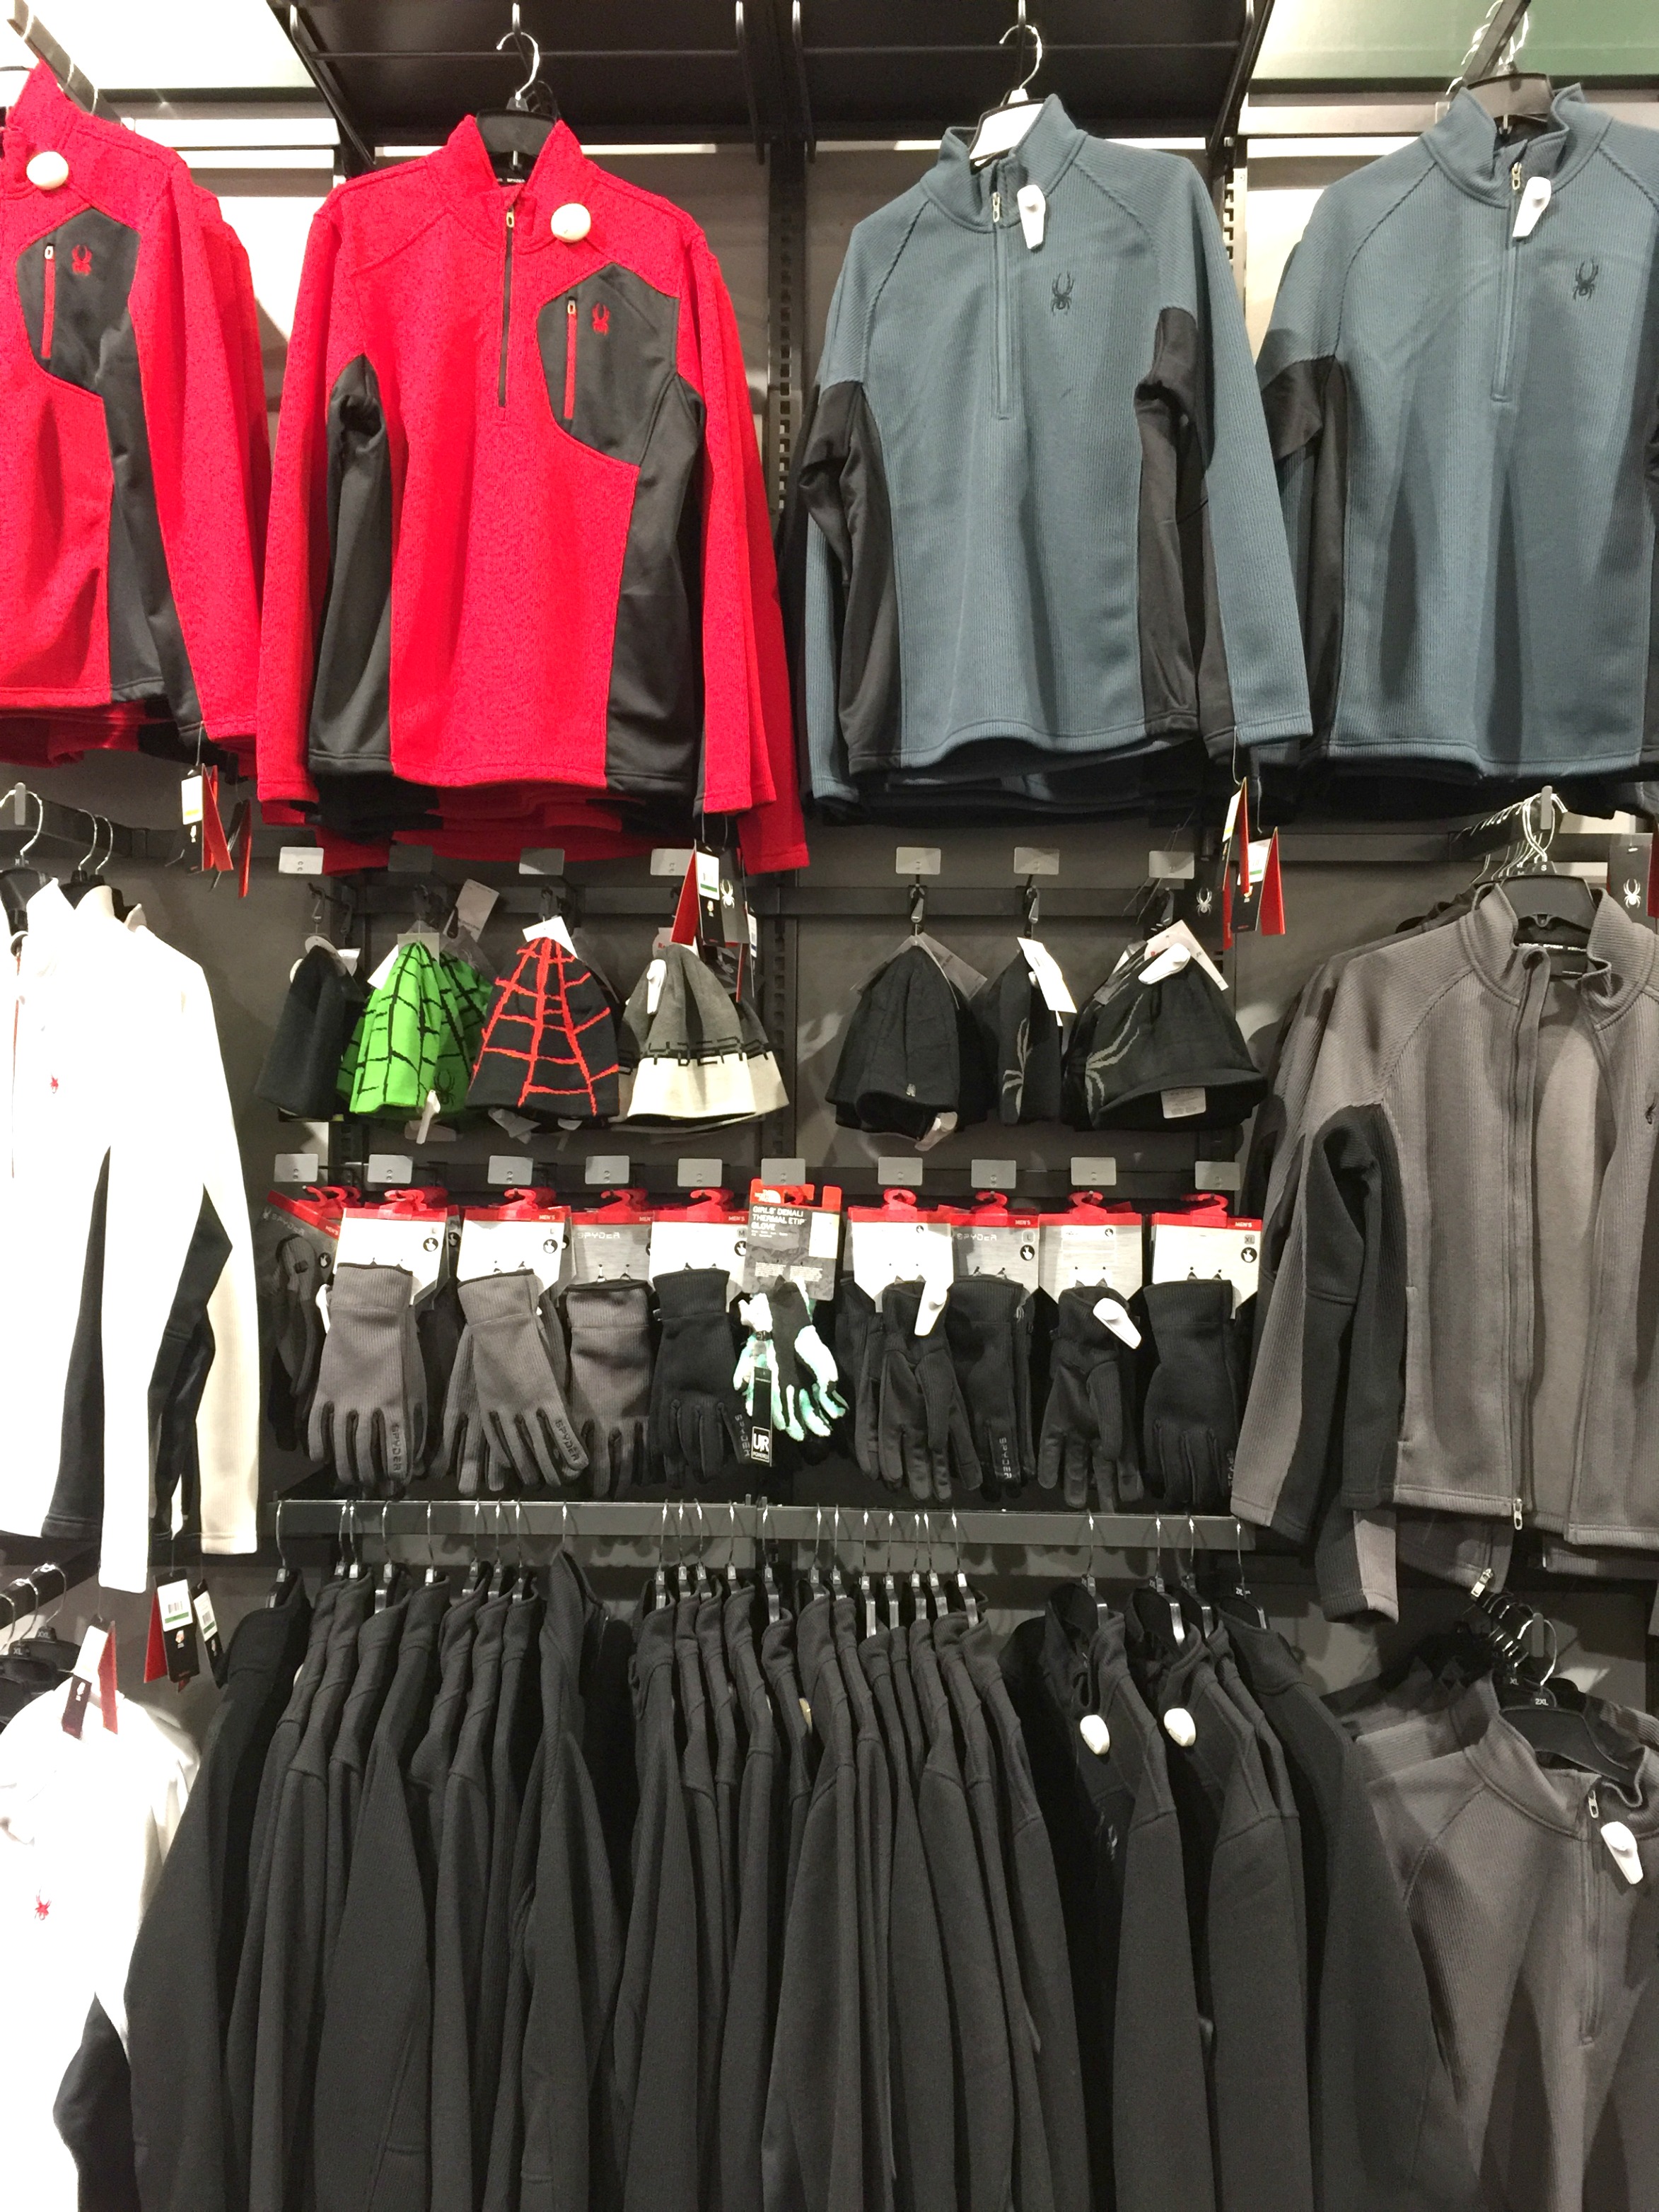 Dick's Sporting Goods recently opened six Houston-area stores.